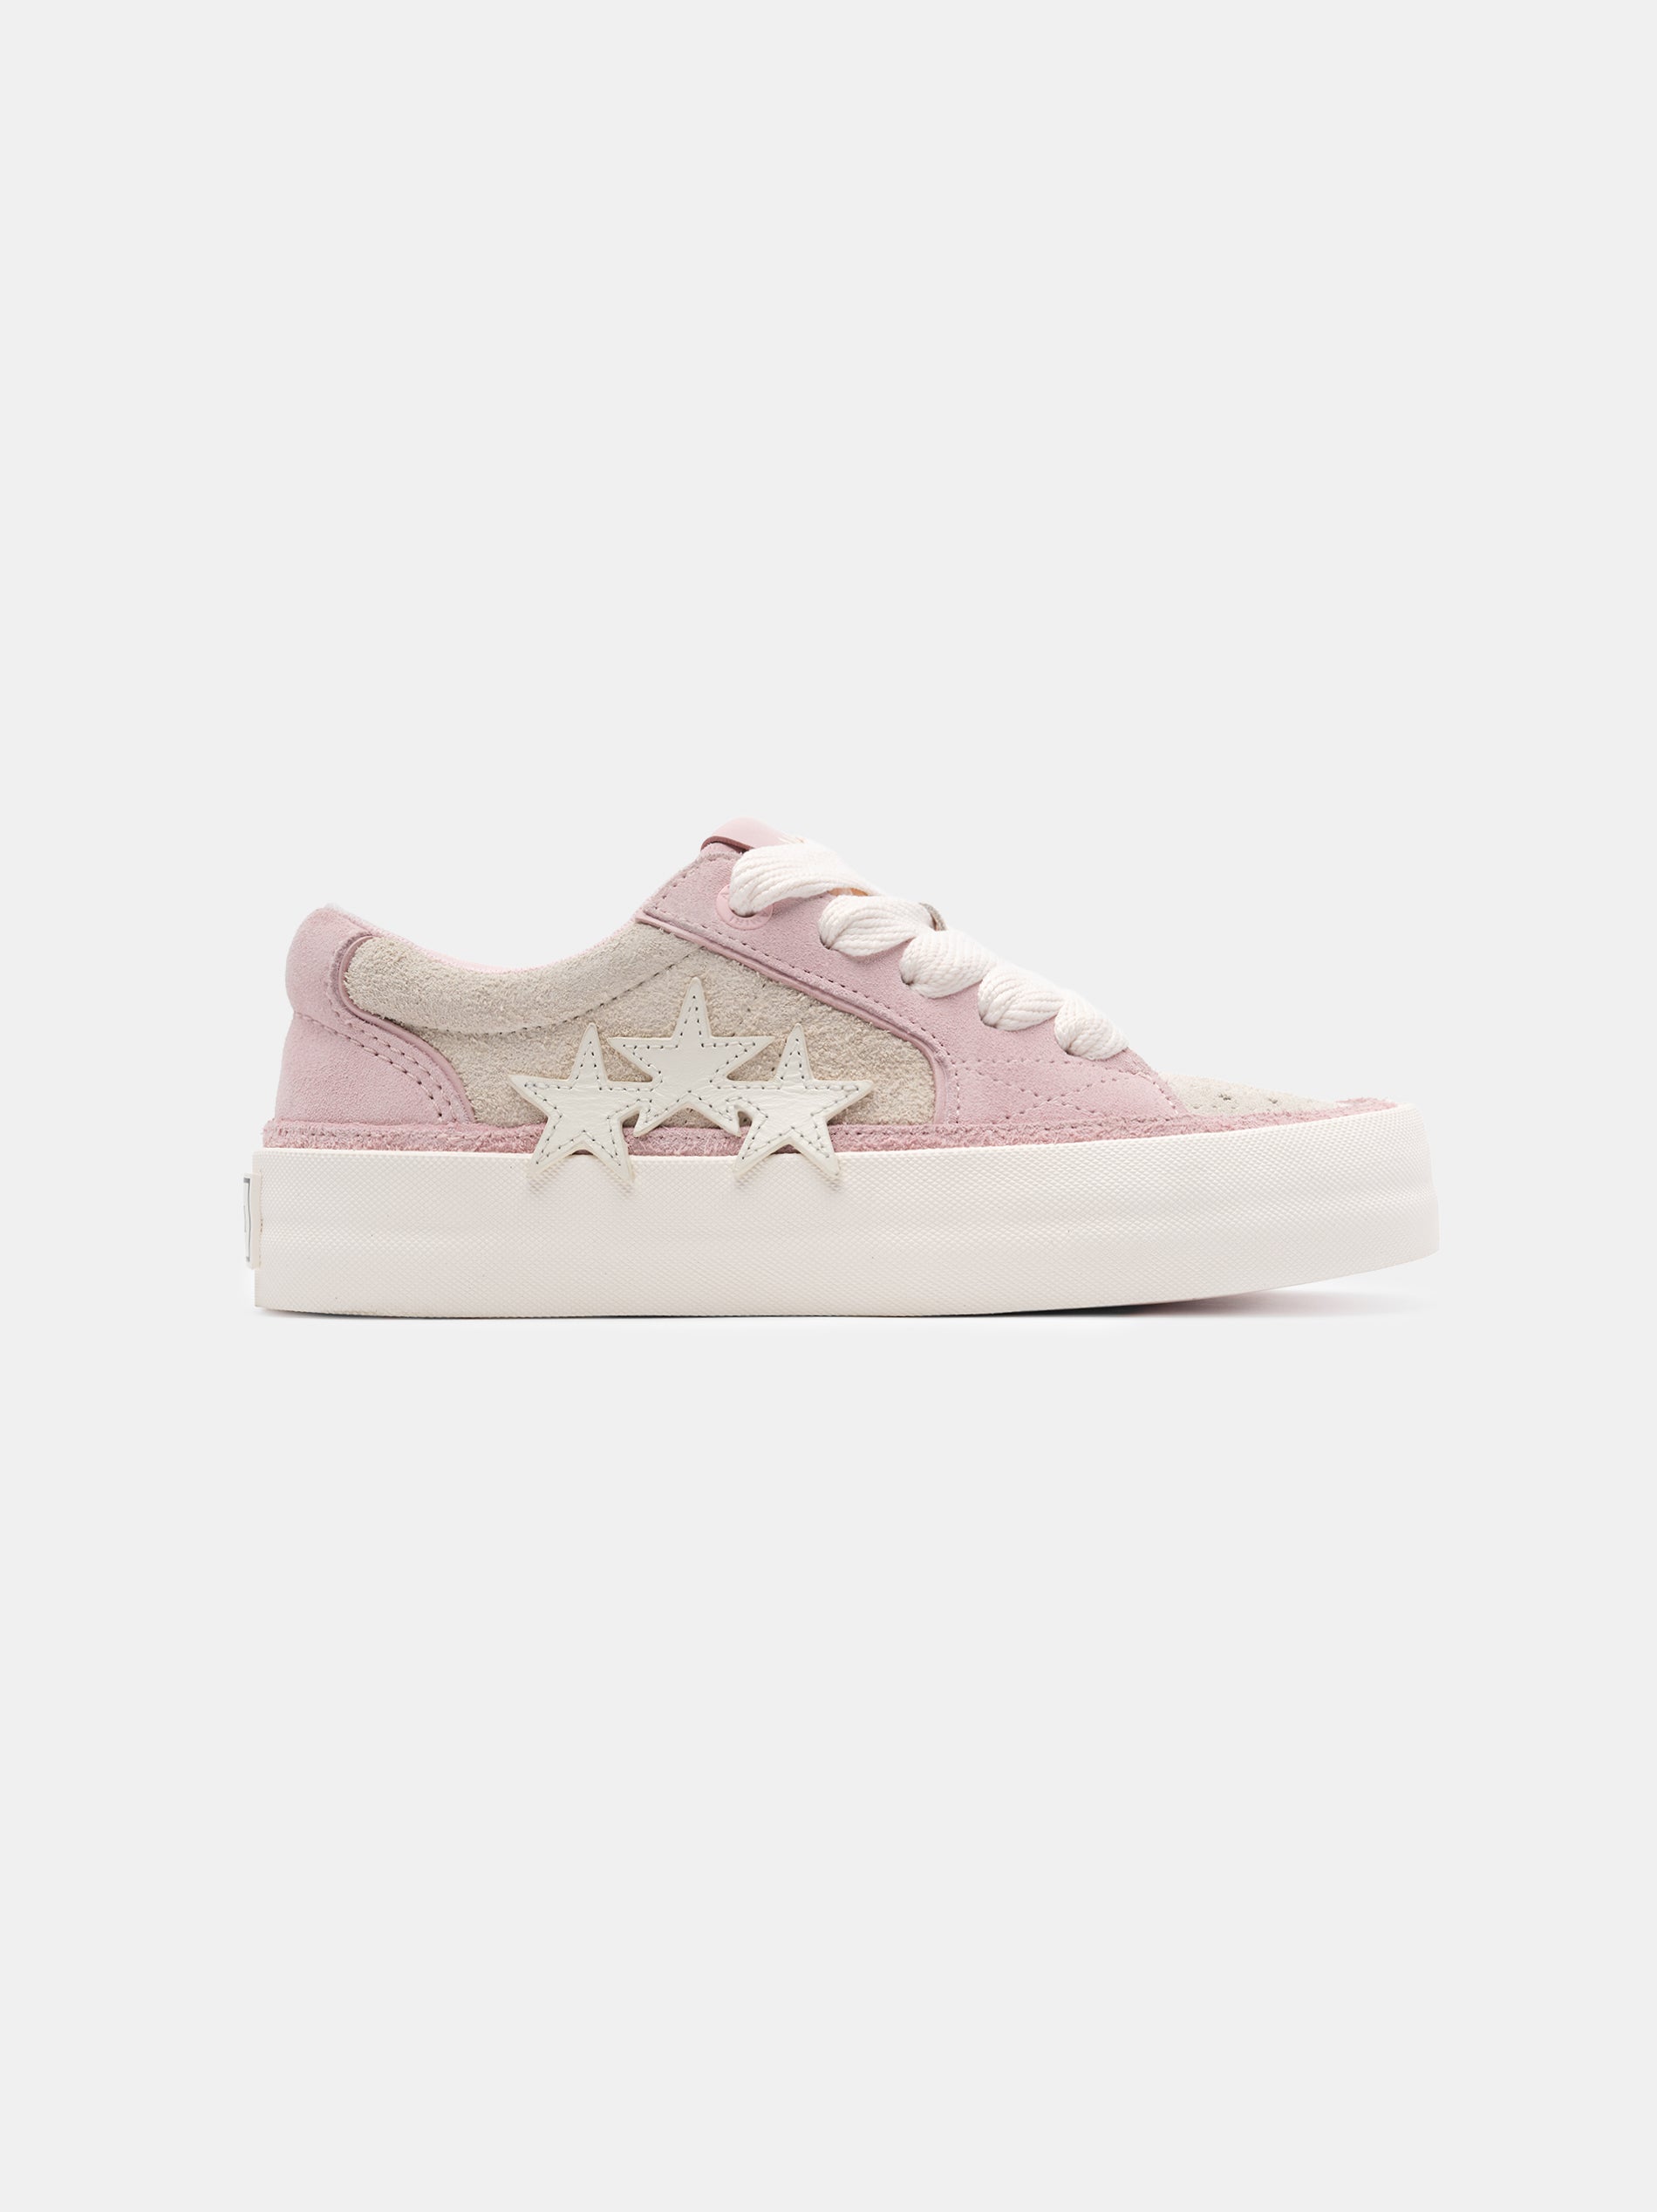 Product WOMEN - WOMEN'S SUNSET SKATE LOW - Birch Pink featured image